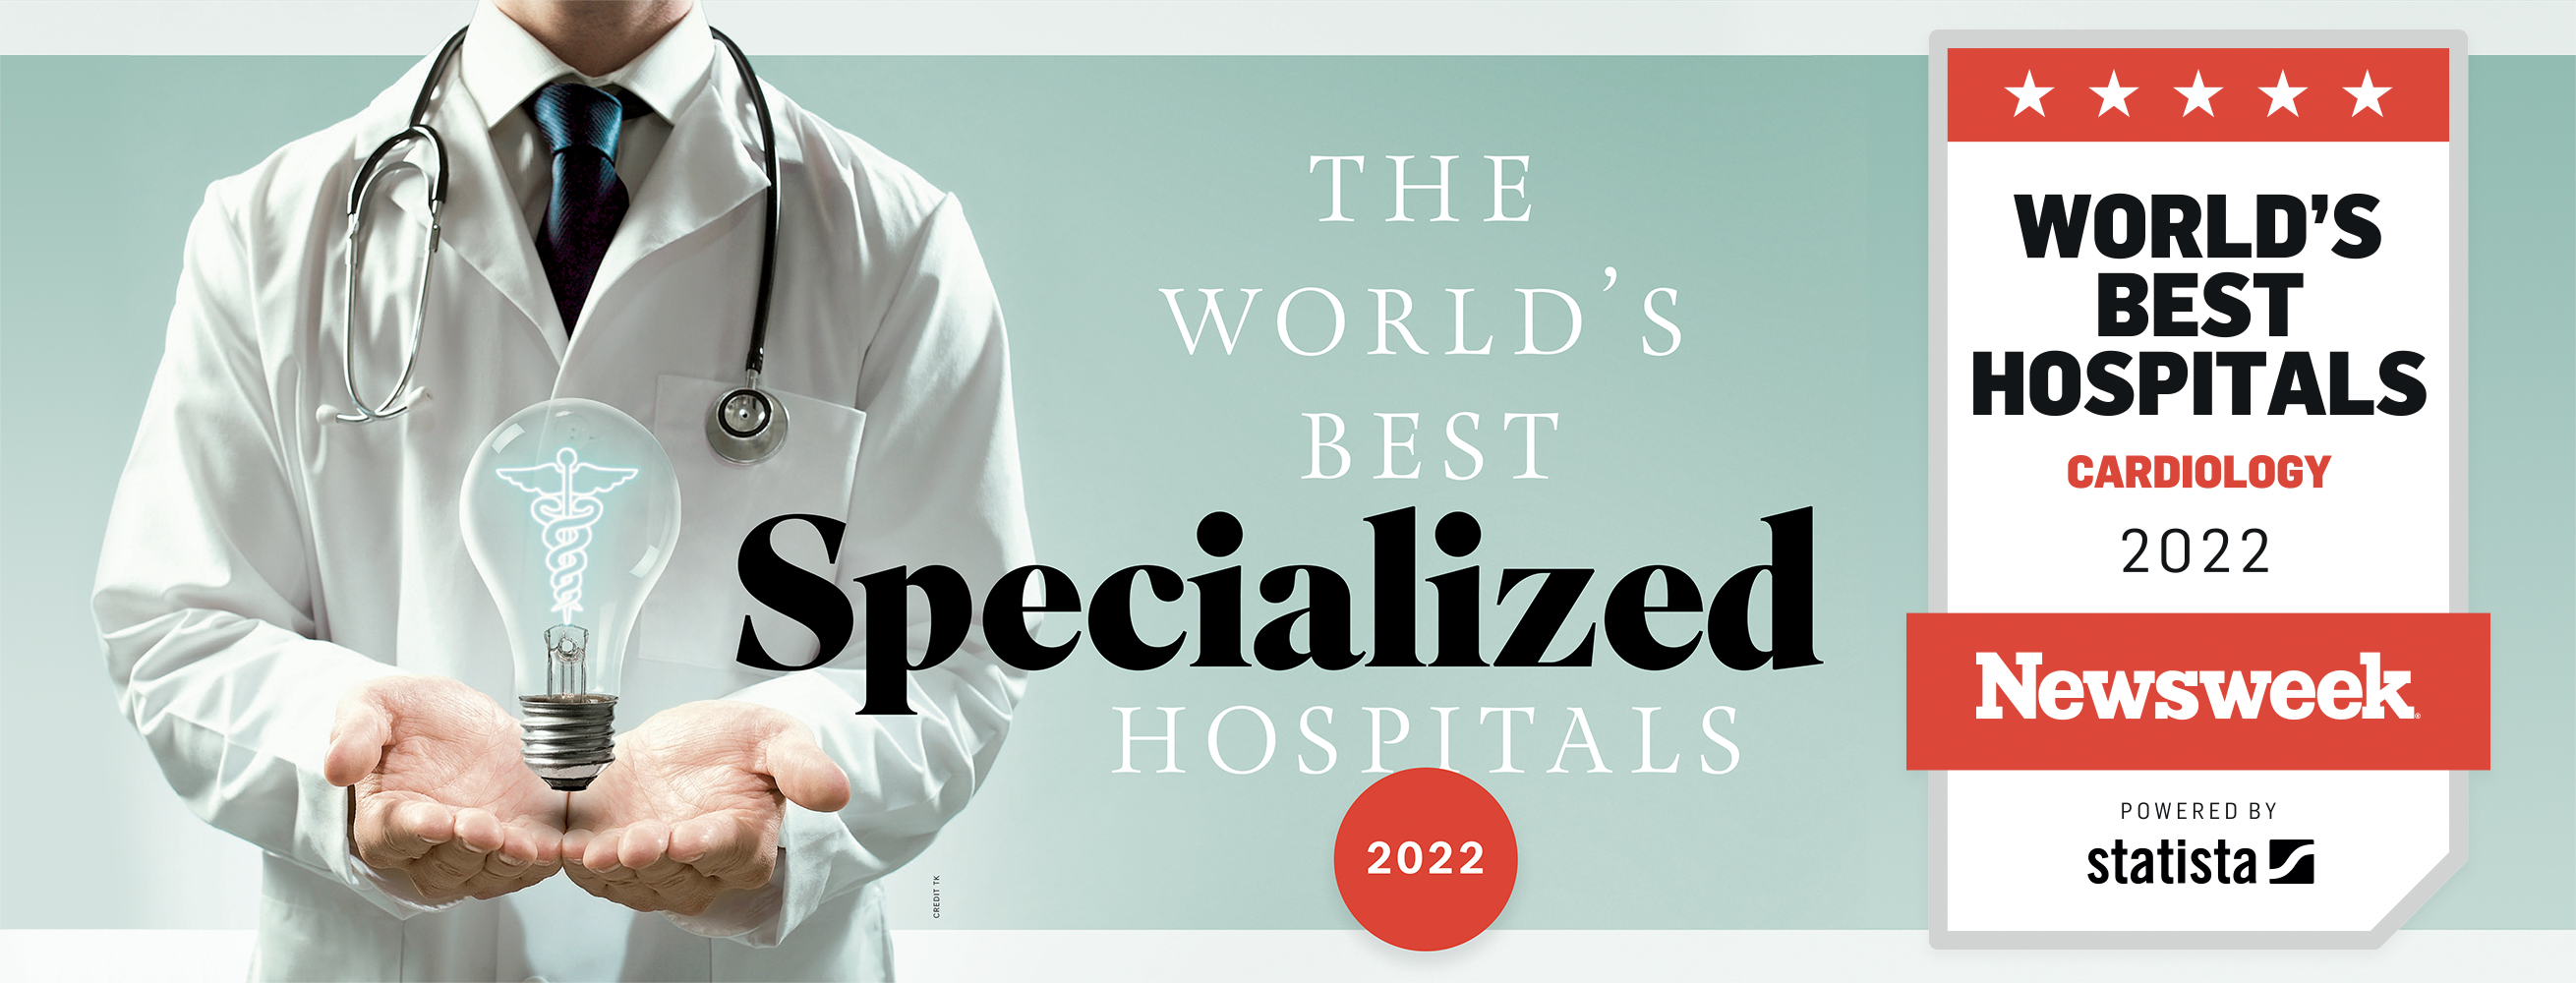 Best Specialized Hospitals 22 Cardiology